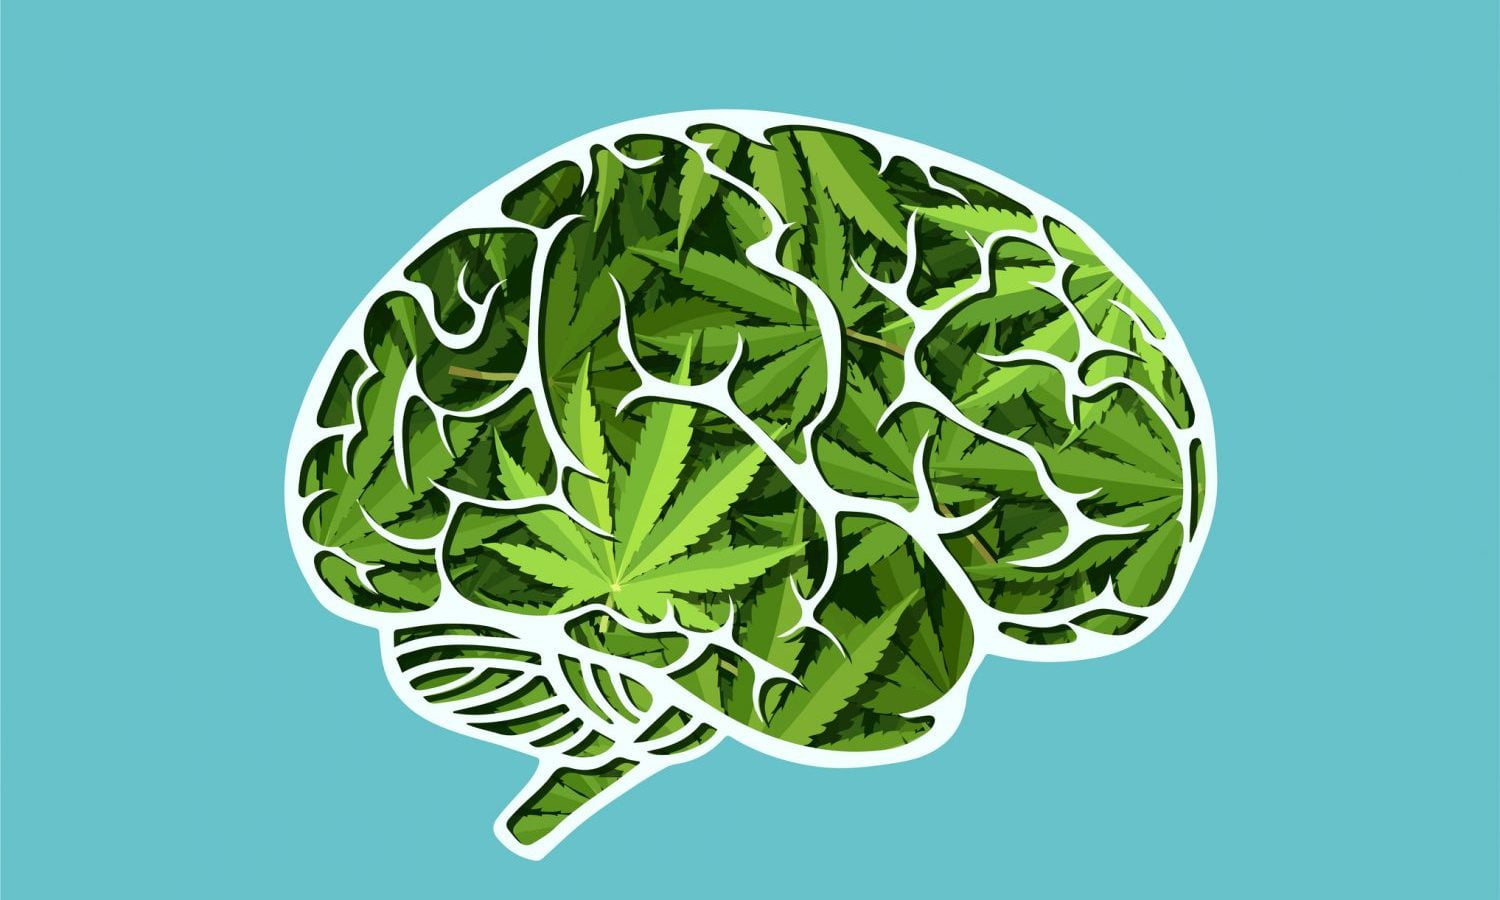 Does Cannabis Use Affect IQ Rates? Here’s What New Study Says